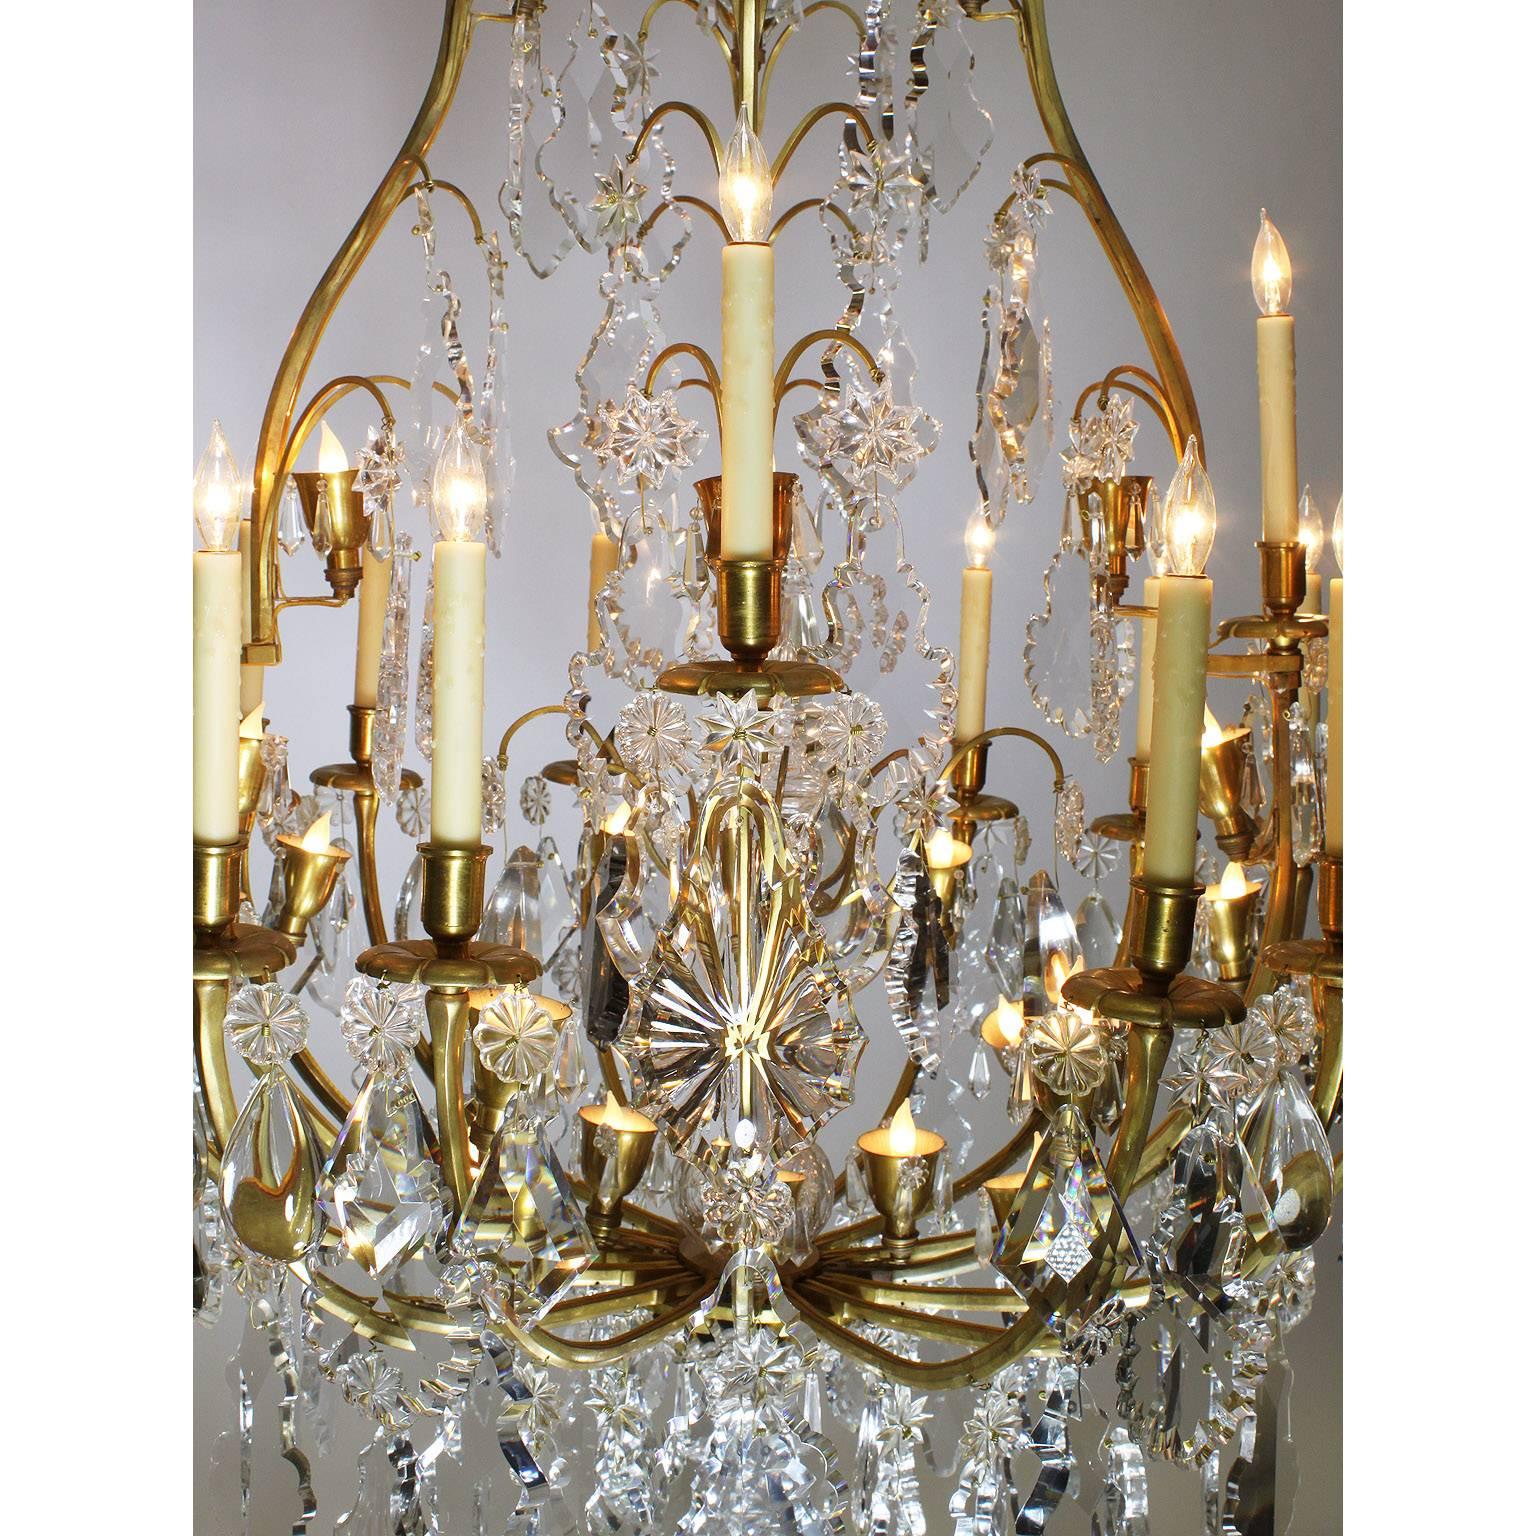 French 19th Century Louis XV Style Gilt-Bronze and Crystal Chandelier For Sale 1